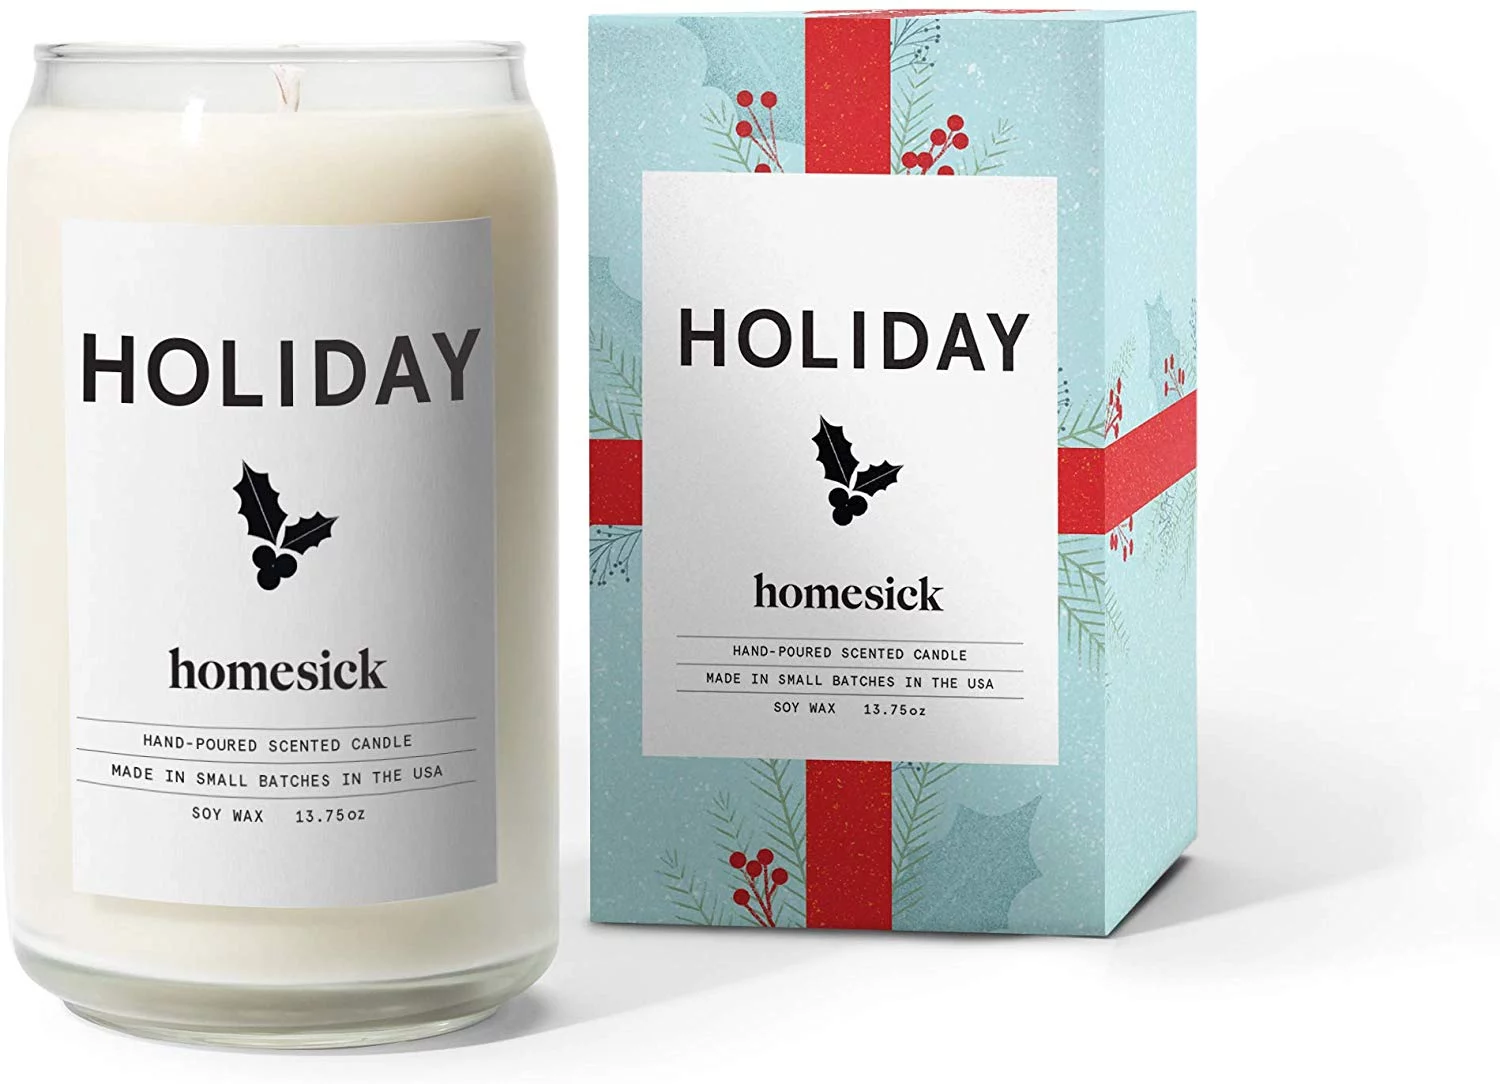 Thanksgiving Gifts 2022: Homesick Holiday Candle 2022